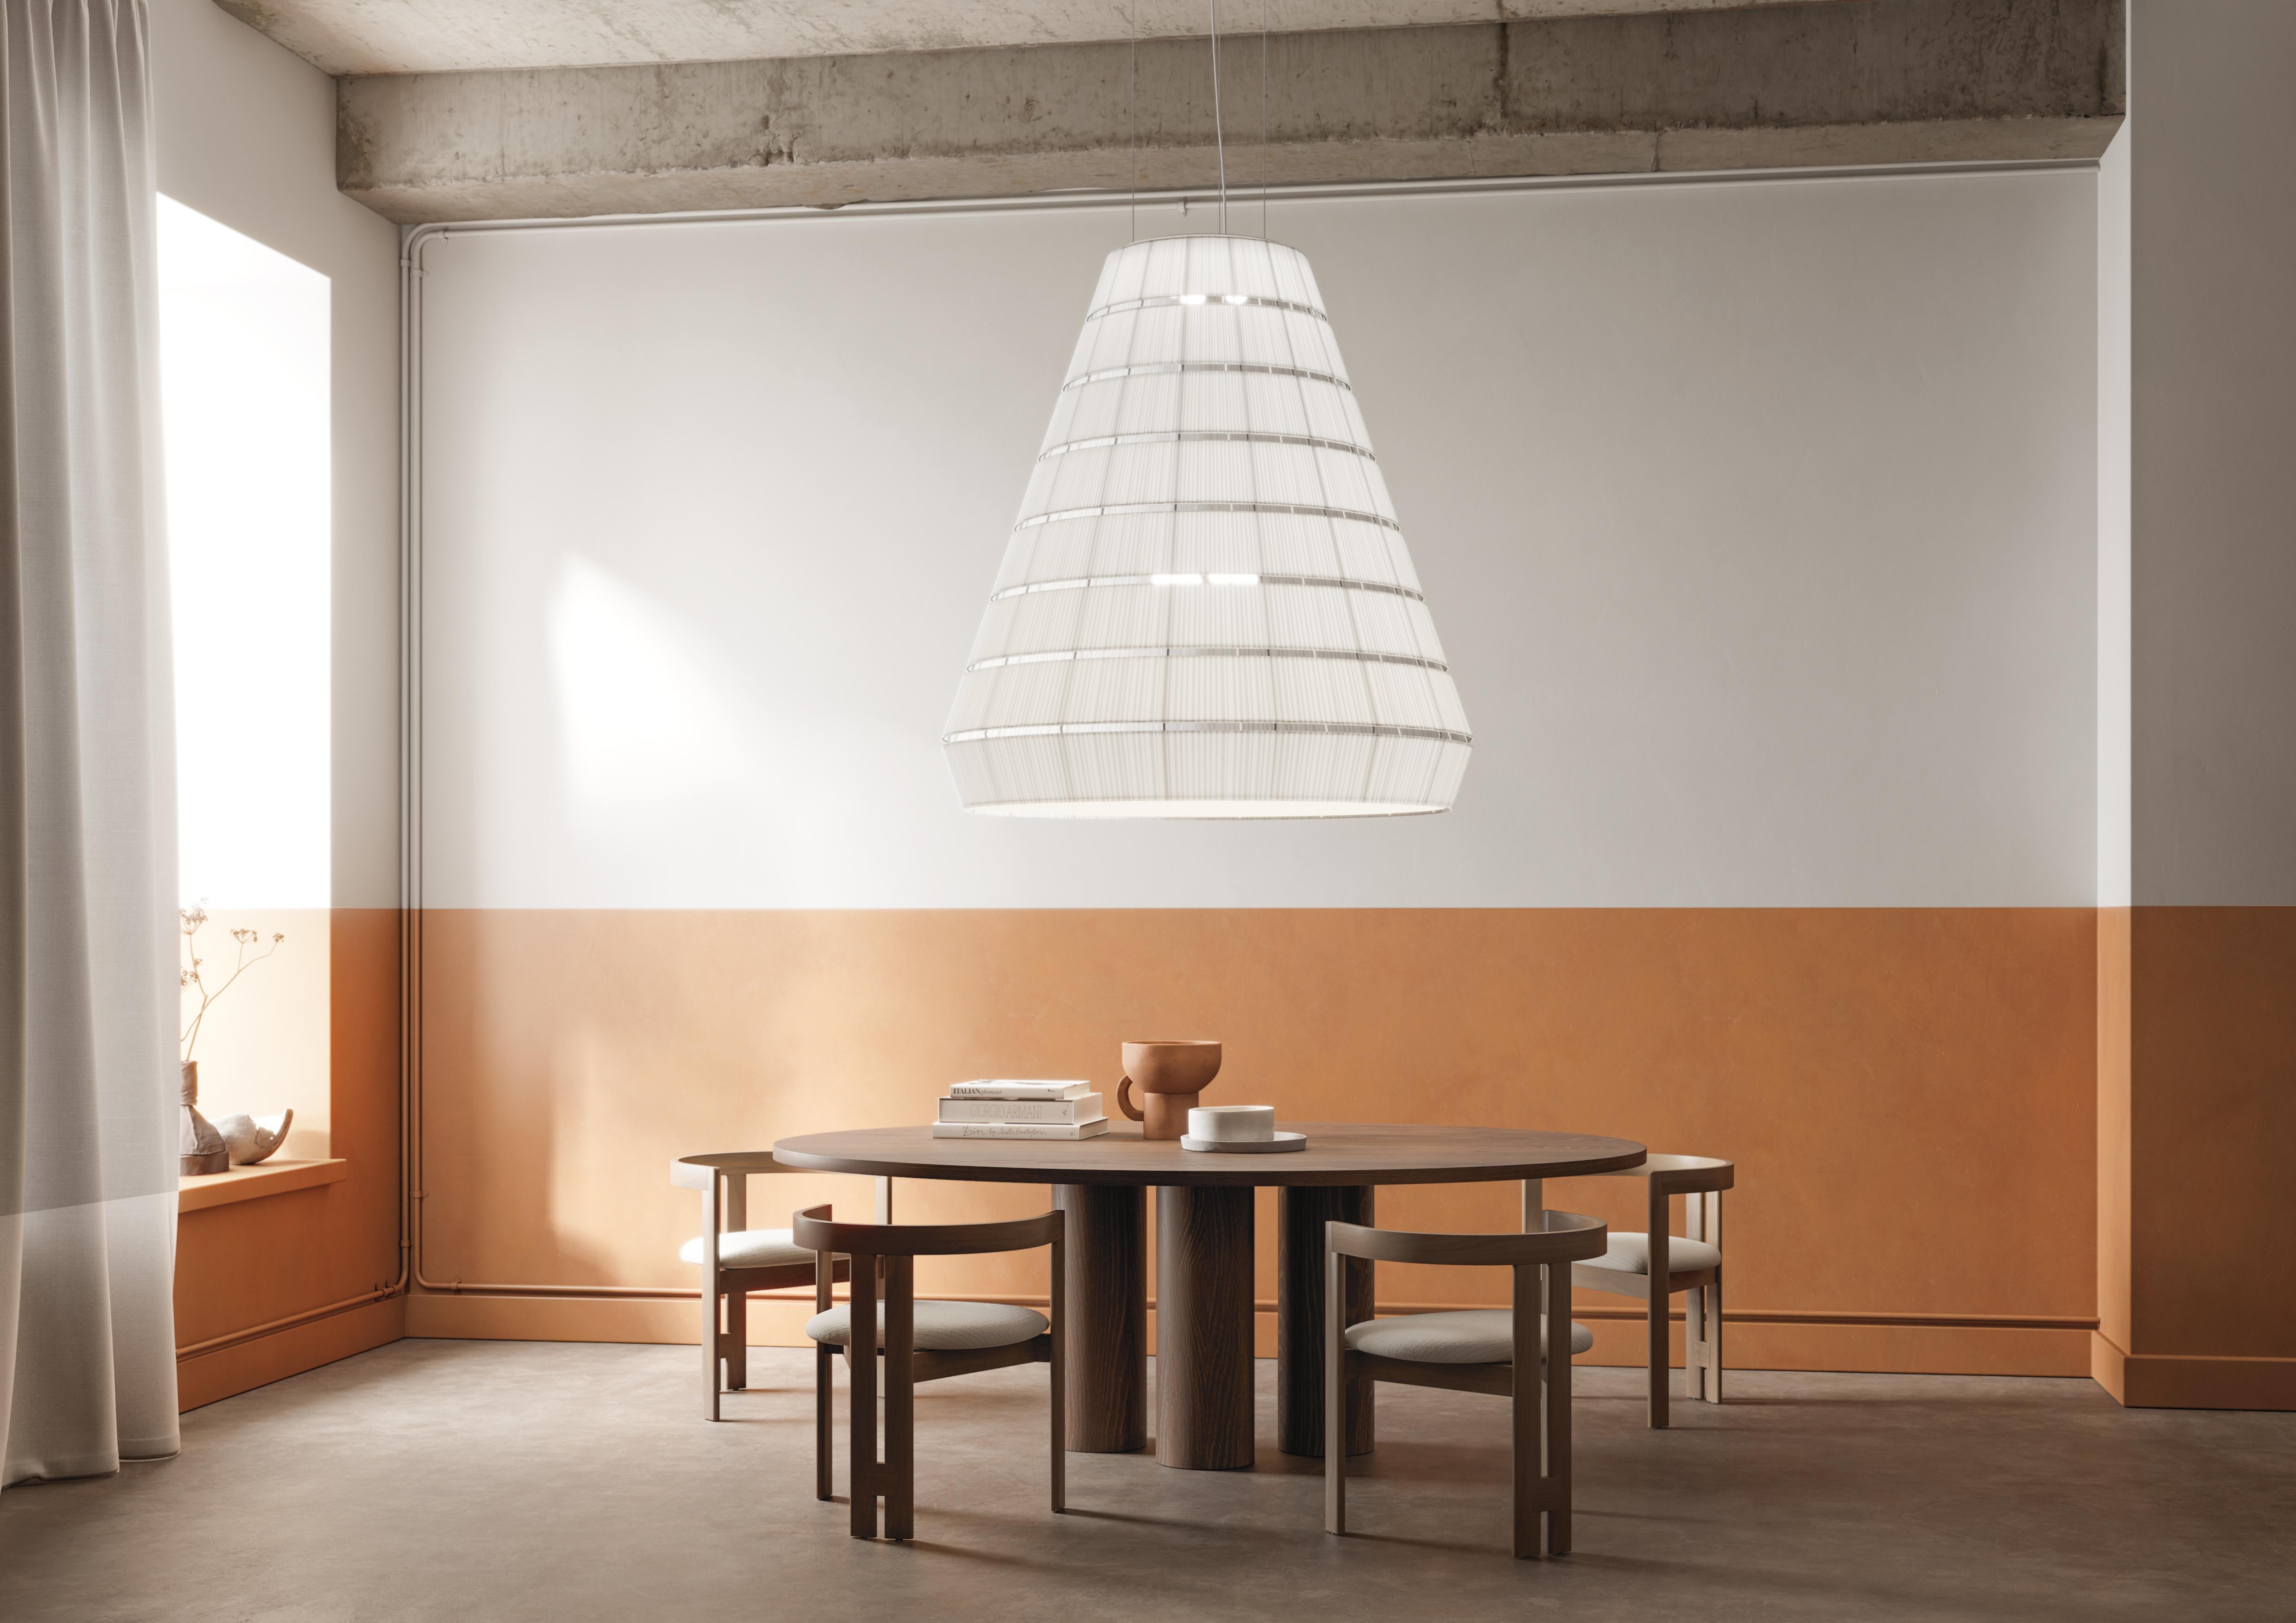 Axolight Layers Type B Pendant Lamp in White Steel by Vanessa Vivian

Layers is a collection of suspension lamps with a strong sculptural presence, obtained through combinations of different geometric shapes. Its layered system is modular, which